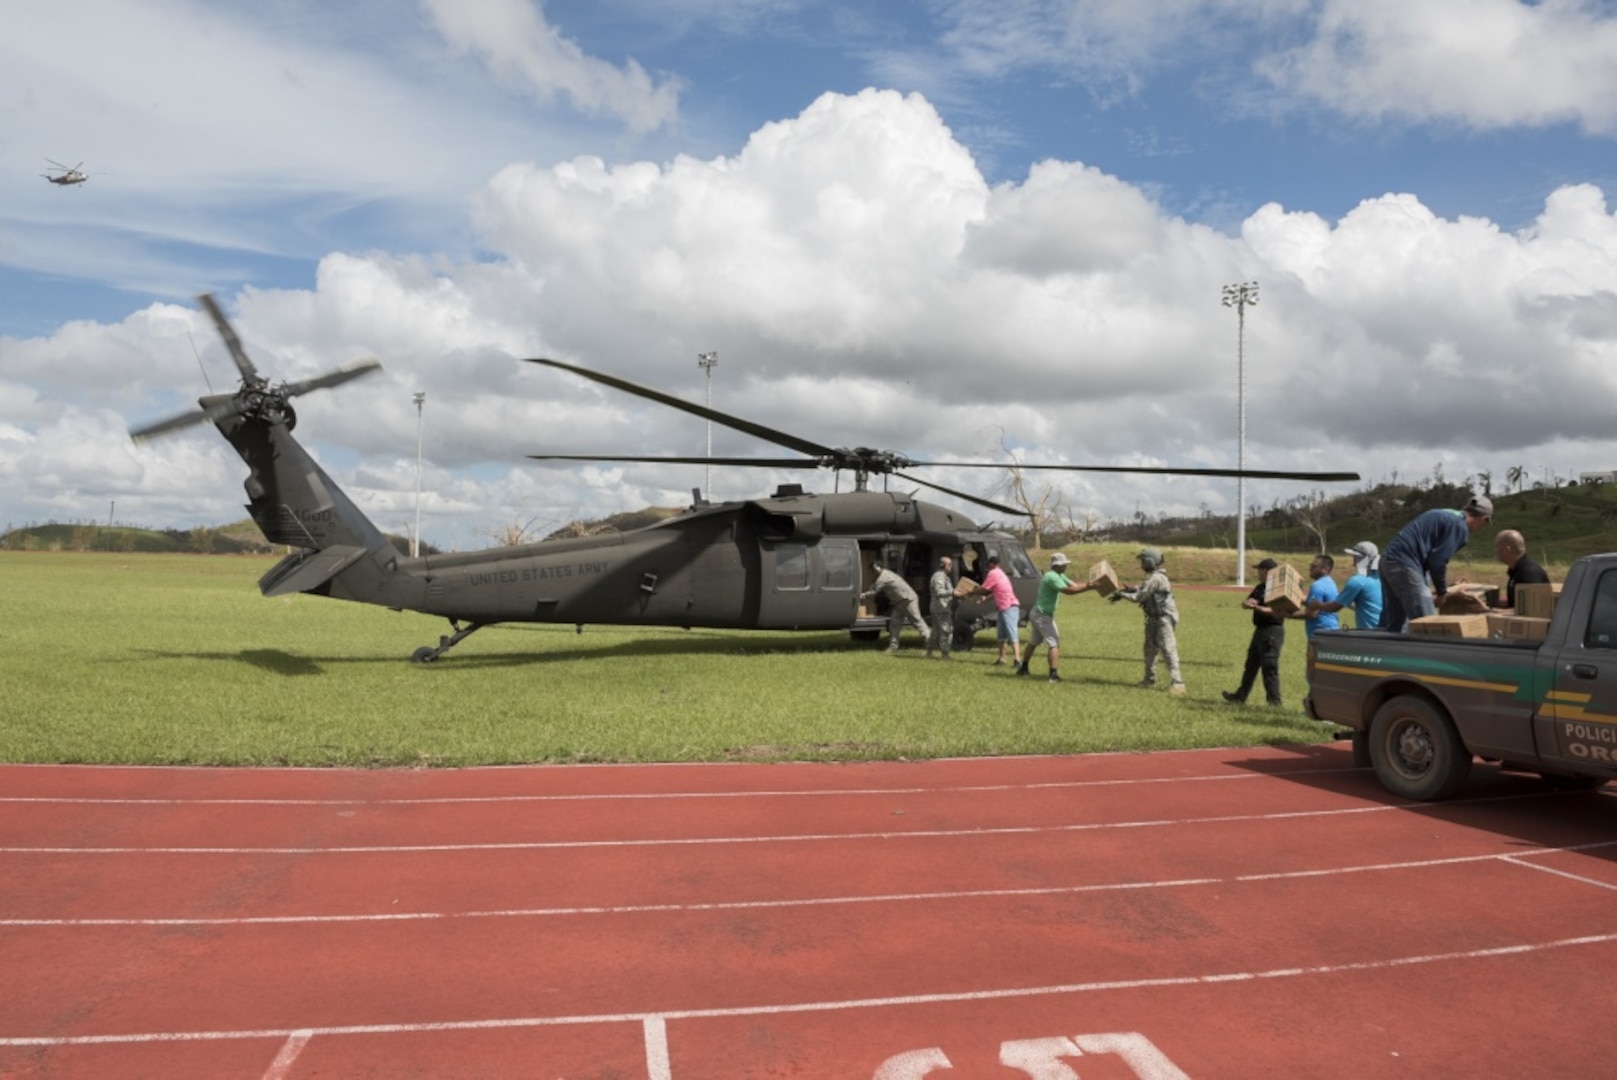 In San Juan, Puerto Rico National Guardsmen load pallets of food and water onto an UH-60 Black Hawk helicopter for distribution to Orocovis, Puerto Rico, Sept. 29, 2017. The National Guard has partnered with the Federal Emergency Management Agency and other state and federal agencies in response and relief operations for Hurricane Maria. Air National Guard photo by Air Force Staff Sgt. Michelle Y. Alvarez-Rea